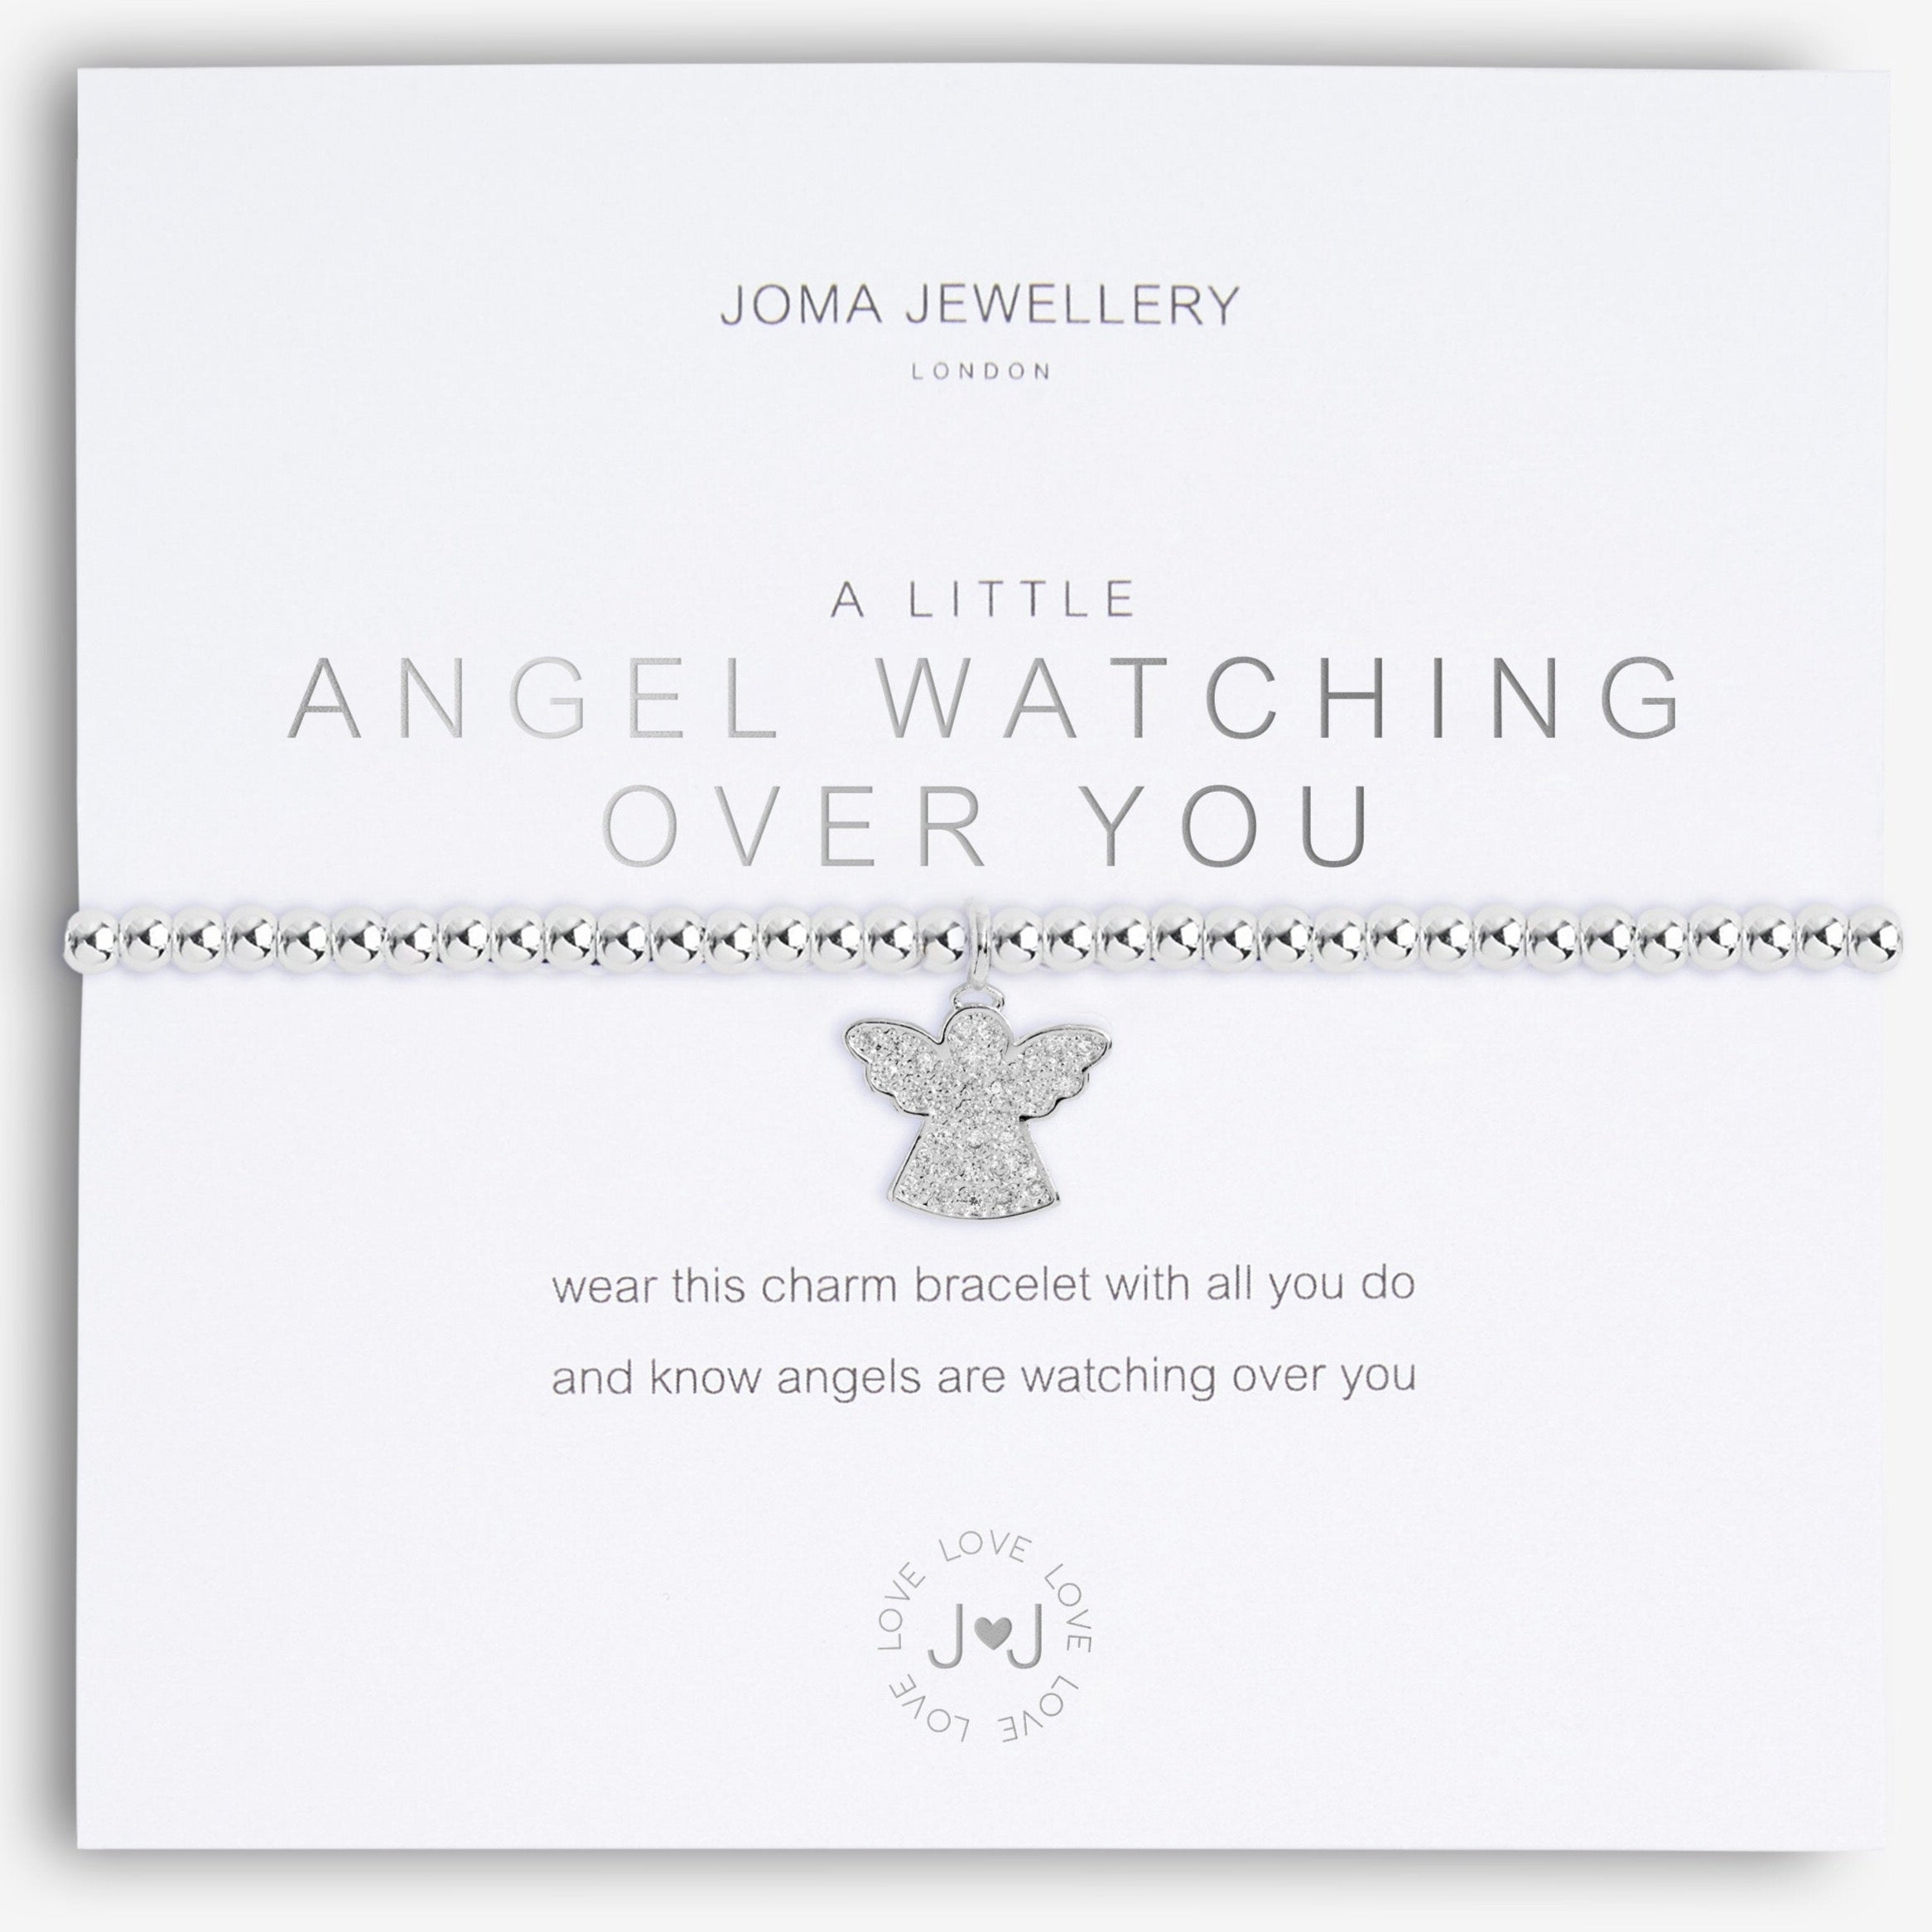 Joma Jewellery A Little Angels Watching Over You Bracelet